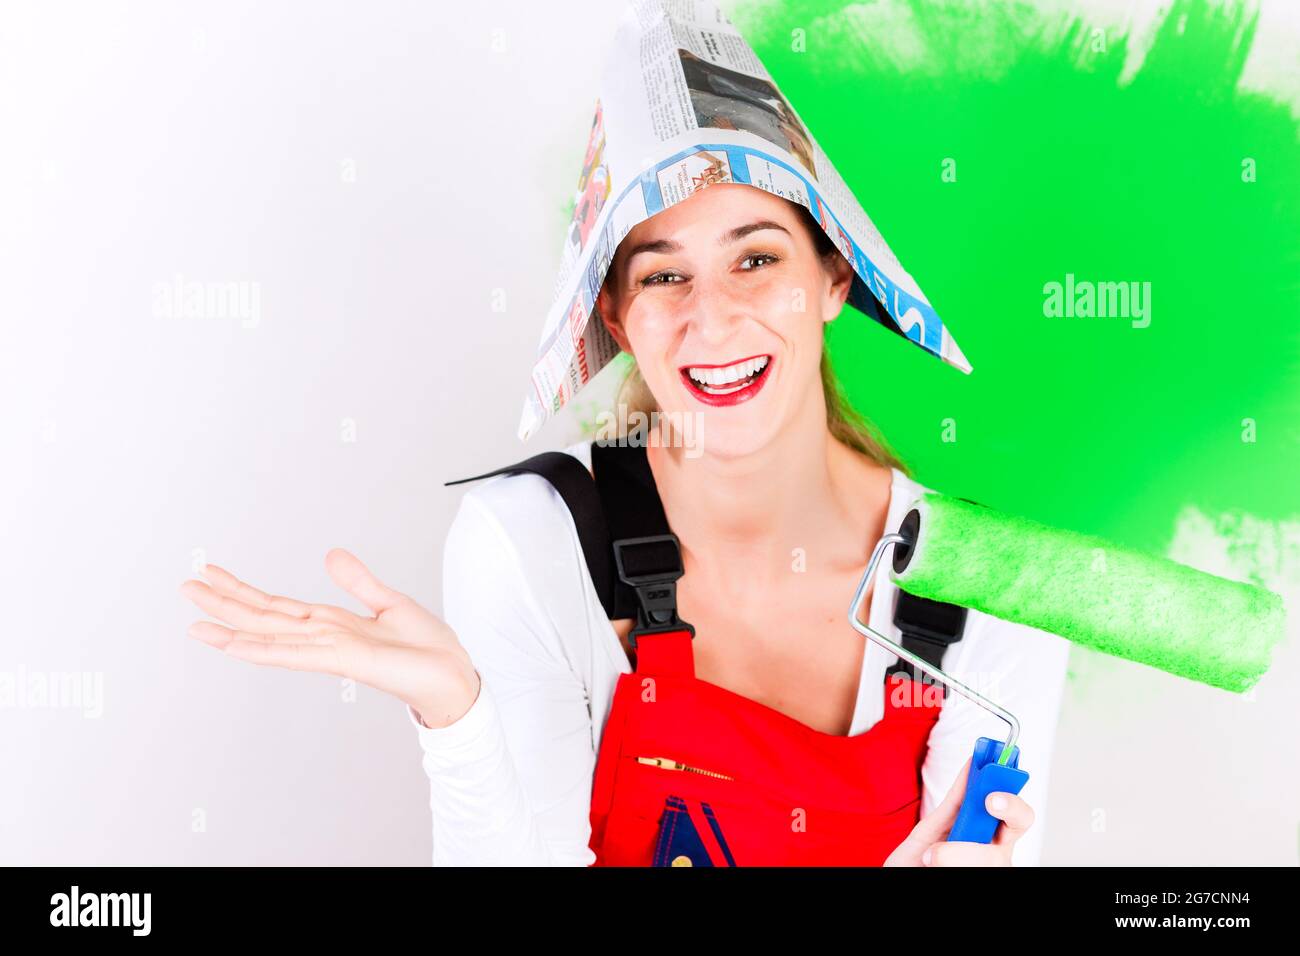 Woman having fun at home improvement painting wall with green colour and brush Stock Photo